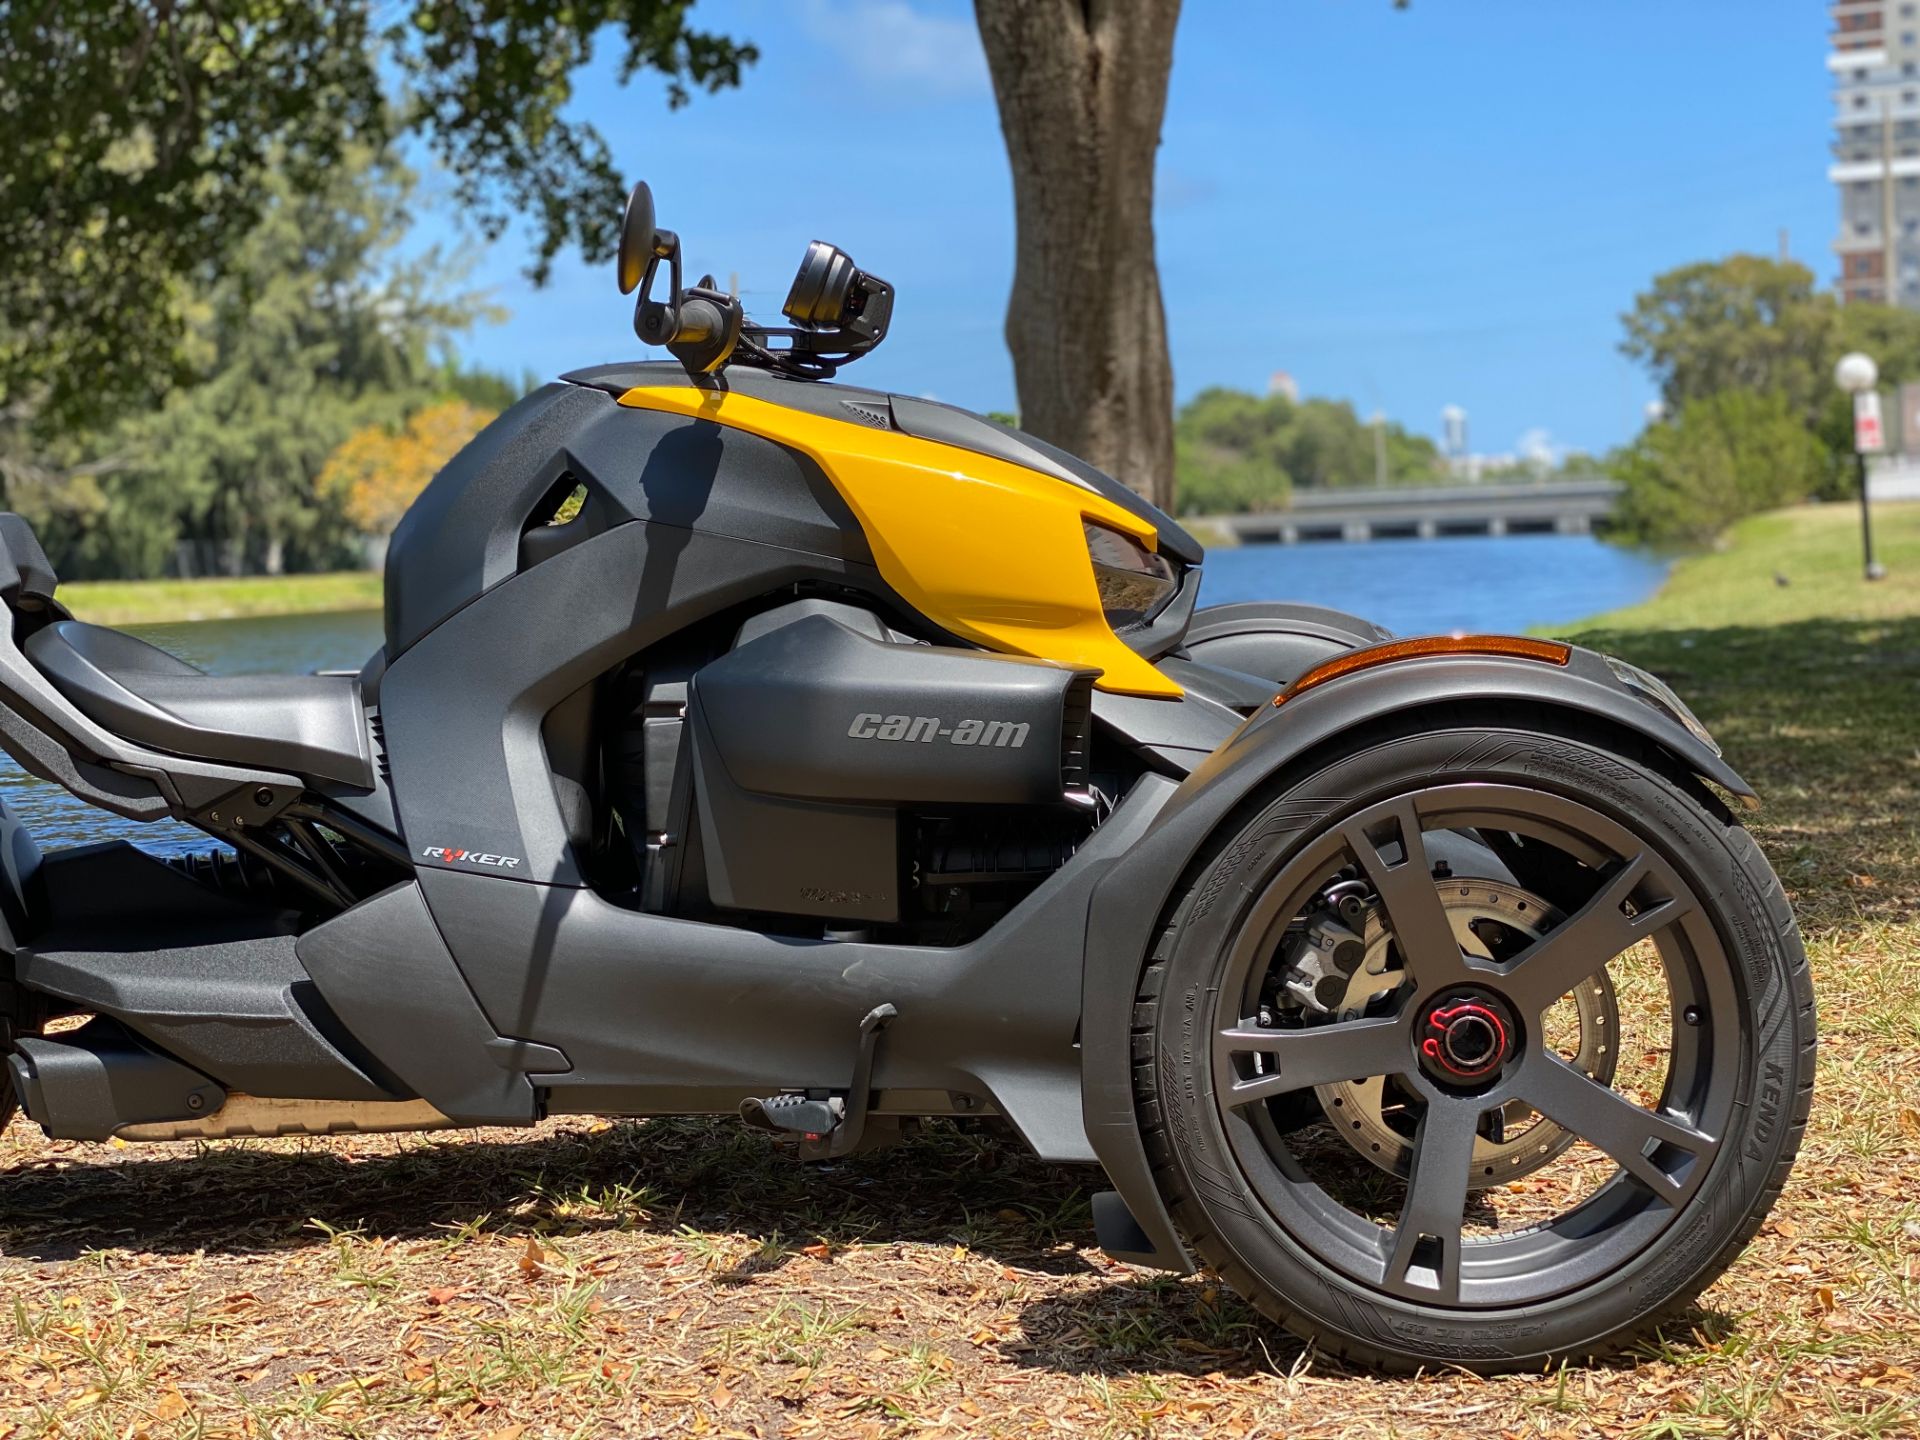 2020 Can-Am Ryker 900 ACE in North Miami Beach, Florida - Photo 7